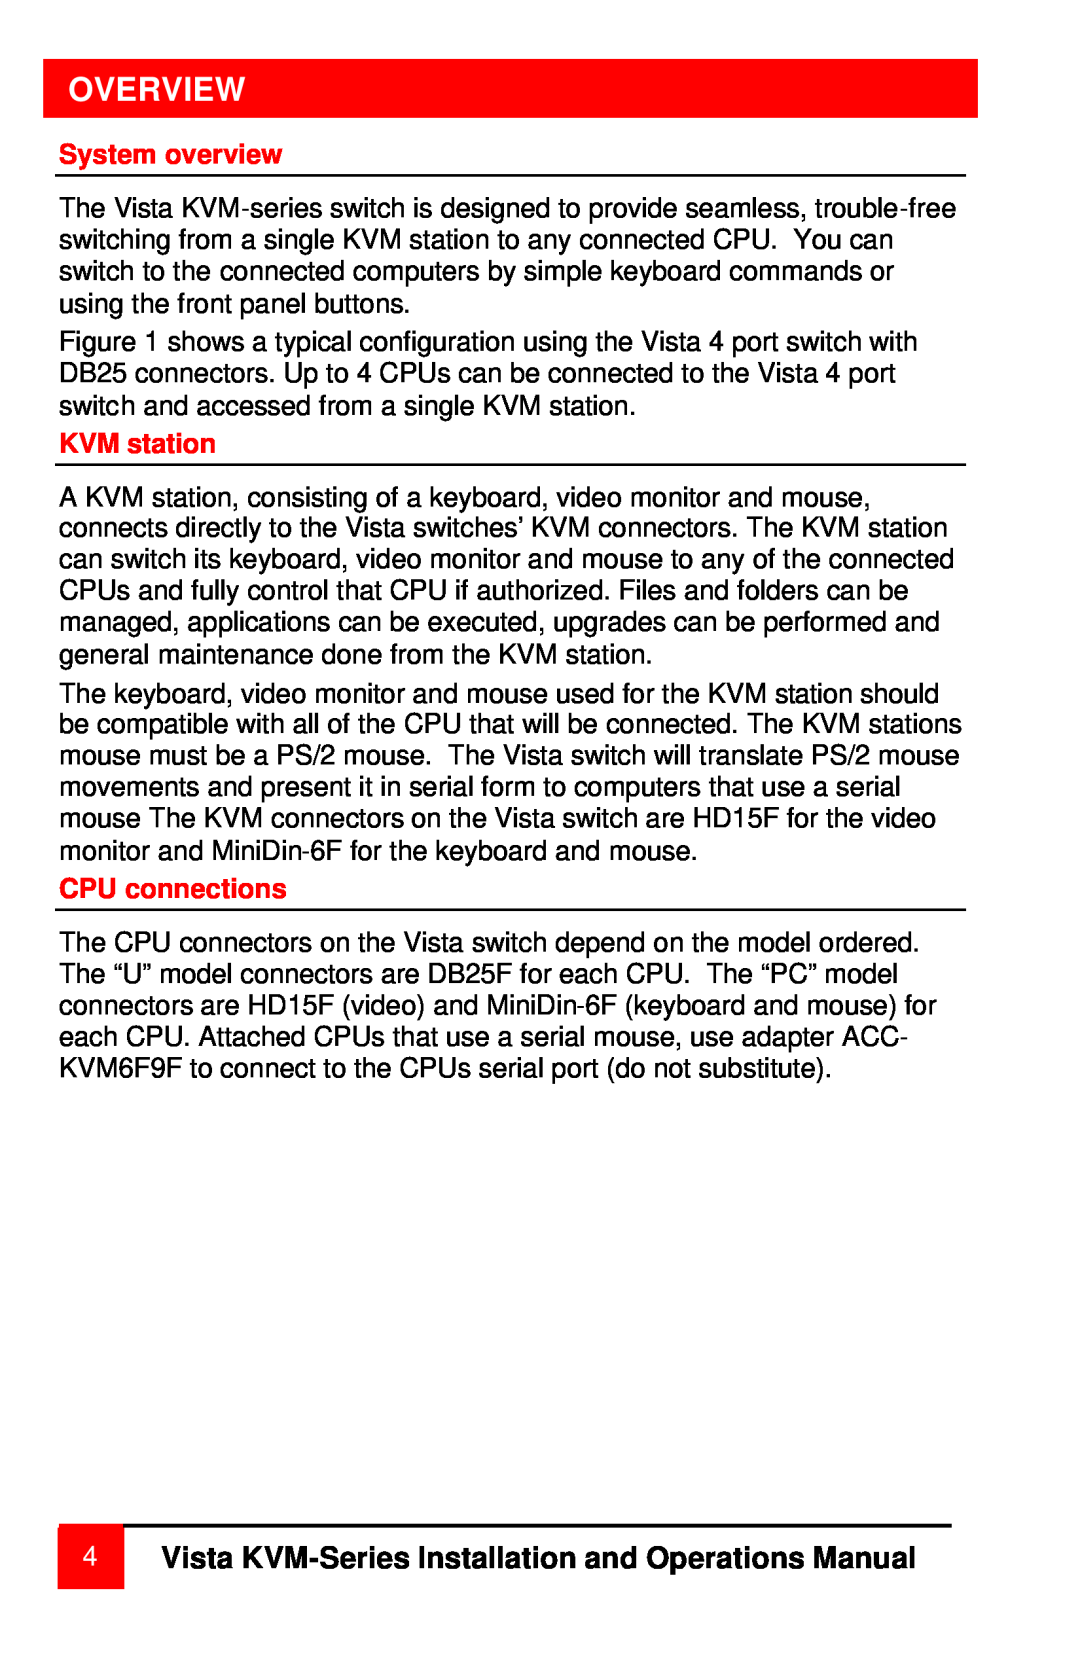 Rose electronic MAN-V8 manual Overview, Vista KVM-Series Installation and Operations Manual, System overview, KVM station 